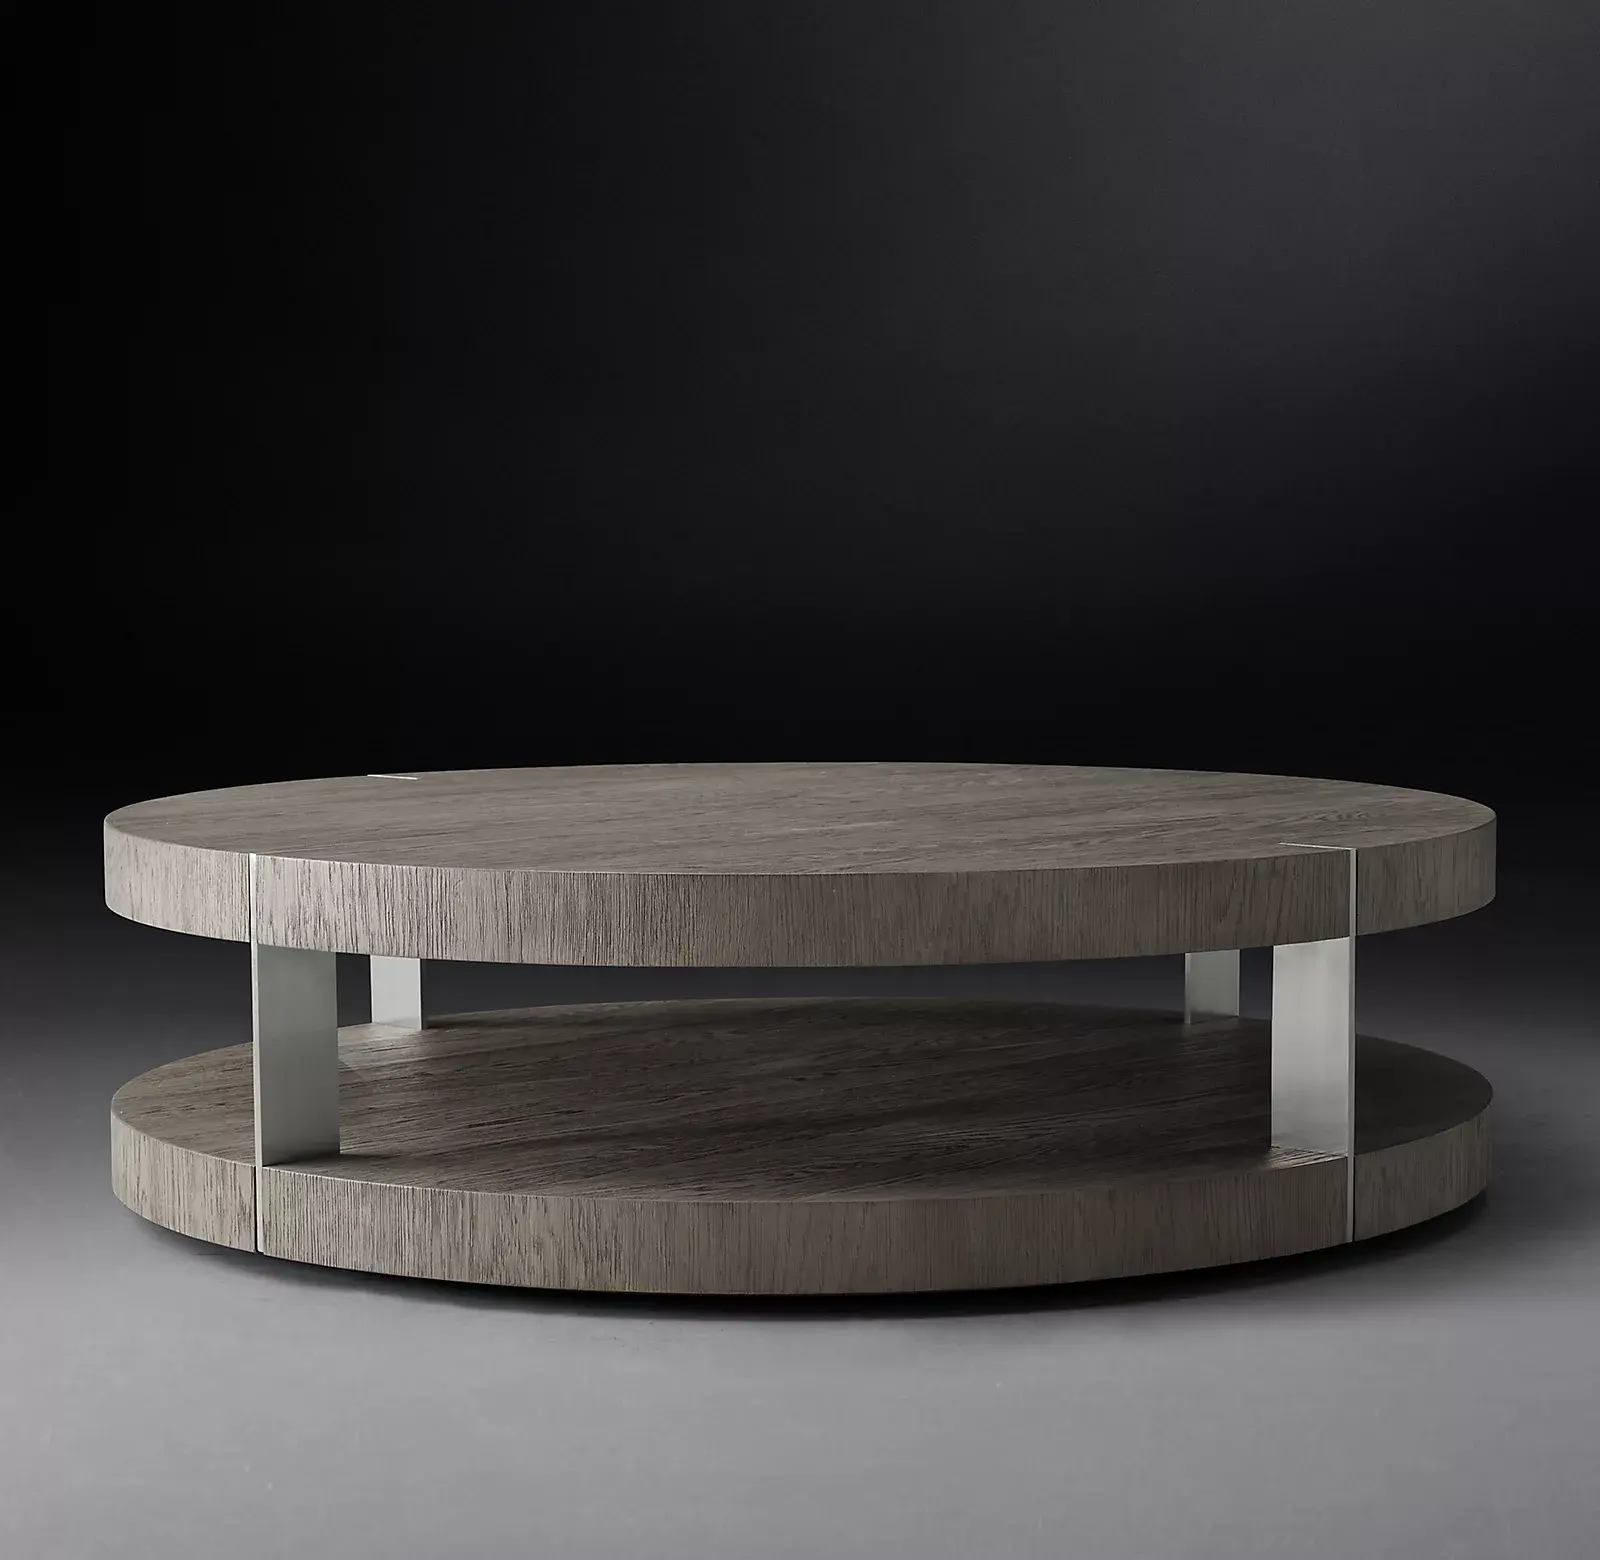 American British French Modern Design Oak Round Coffee Table Living Room Furniture For Luxury Villa Apartment Project